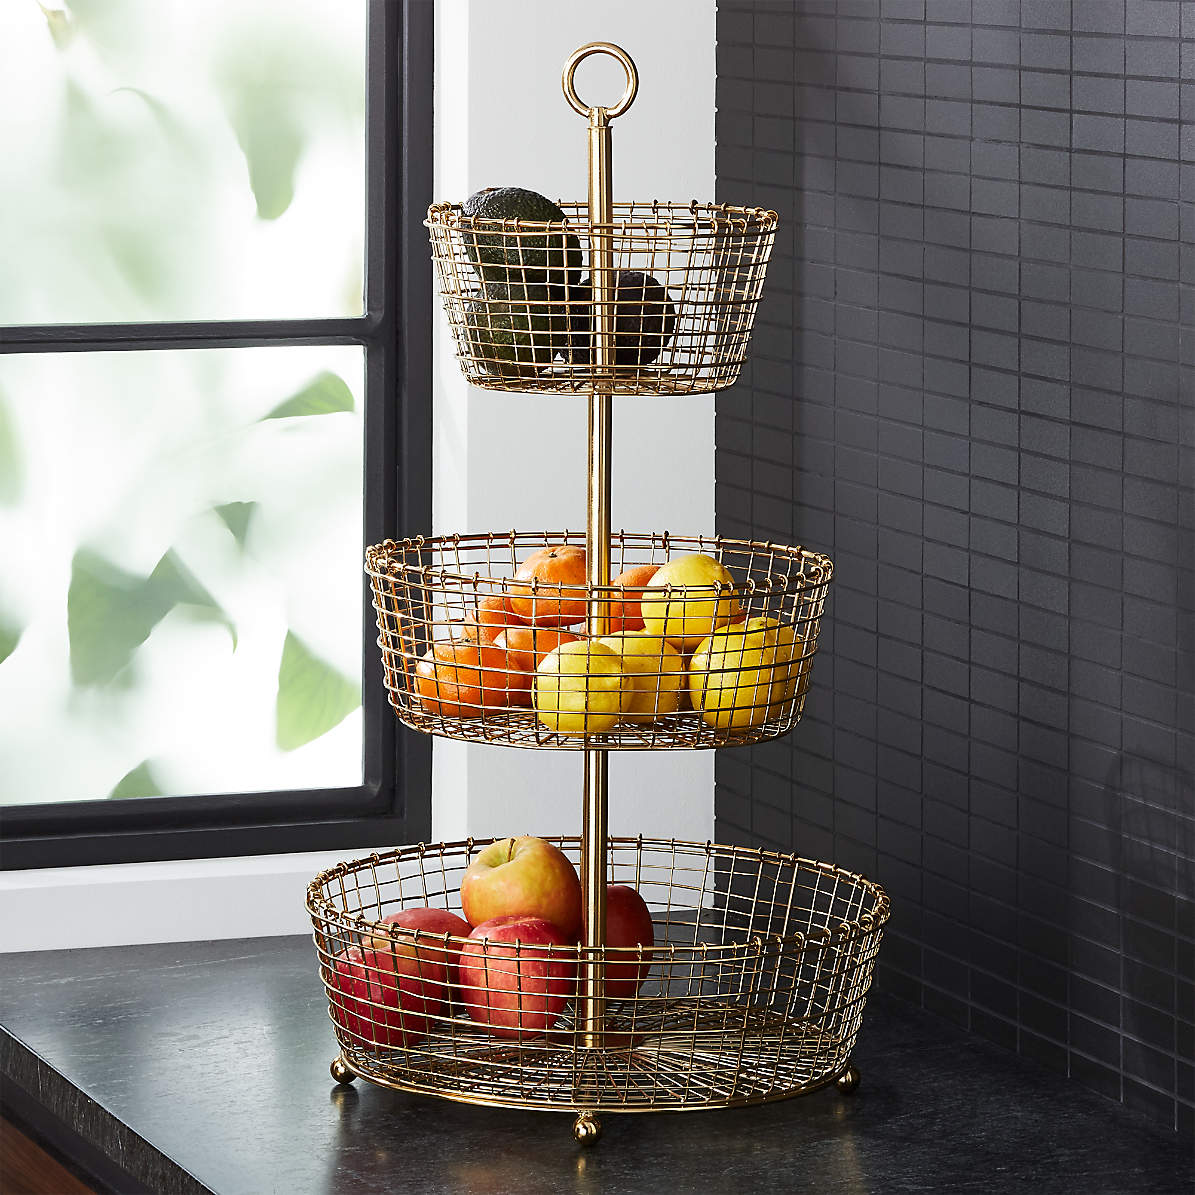 White 3 Tier Fruit Basket Metal Mesh Fruit Rack with 3 Rounds Fruit Bowls Large Tiered Fruit Storage Stand Container for Kitchen Living Room Office